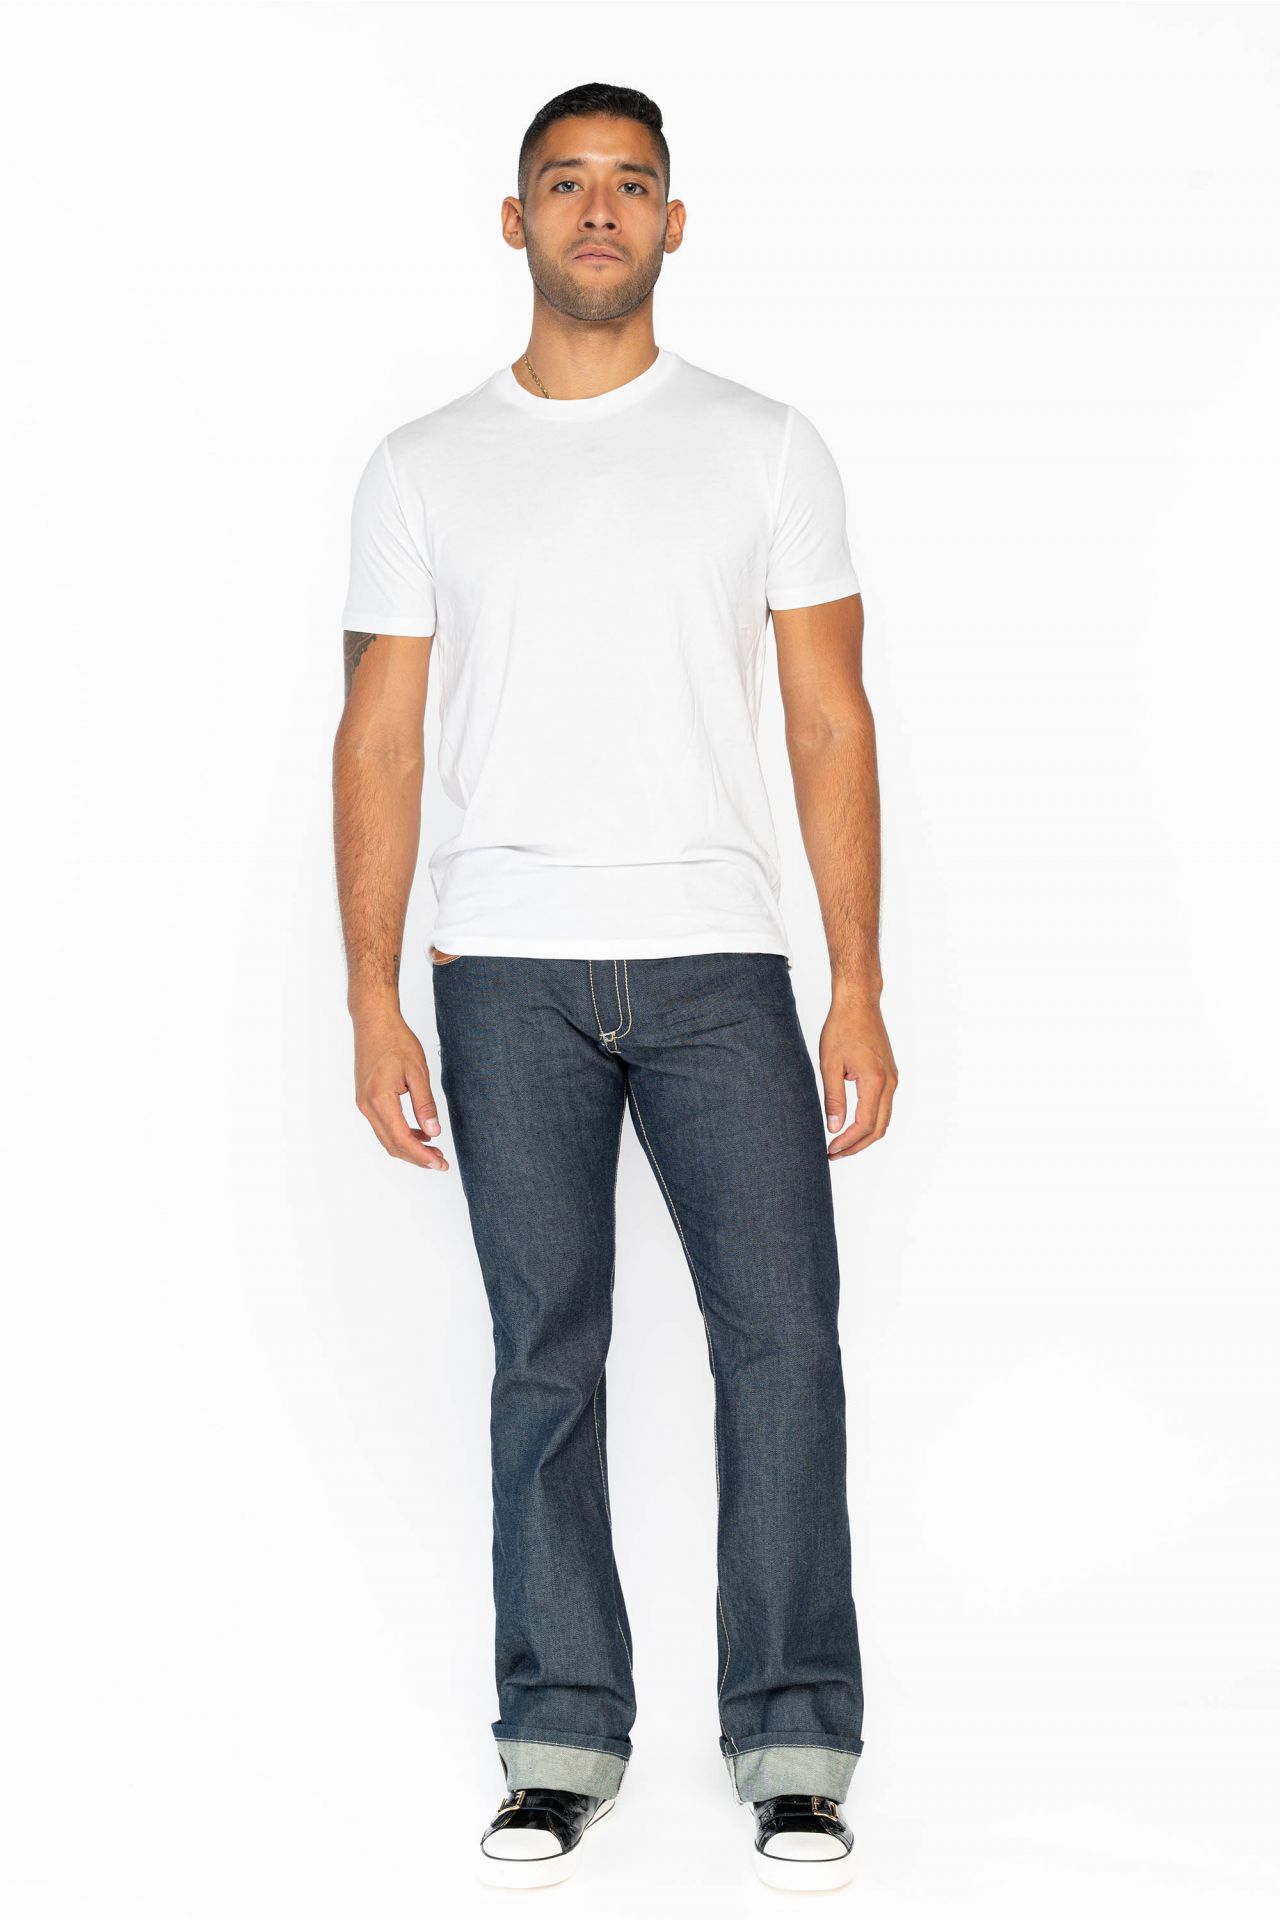 RAW DENIM COLLECTION MENS BOOTCUT JEANS WITH LEATHER INSERTS IN INDIGO RAW